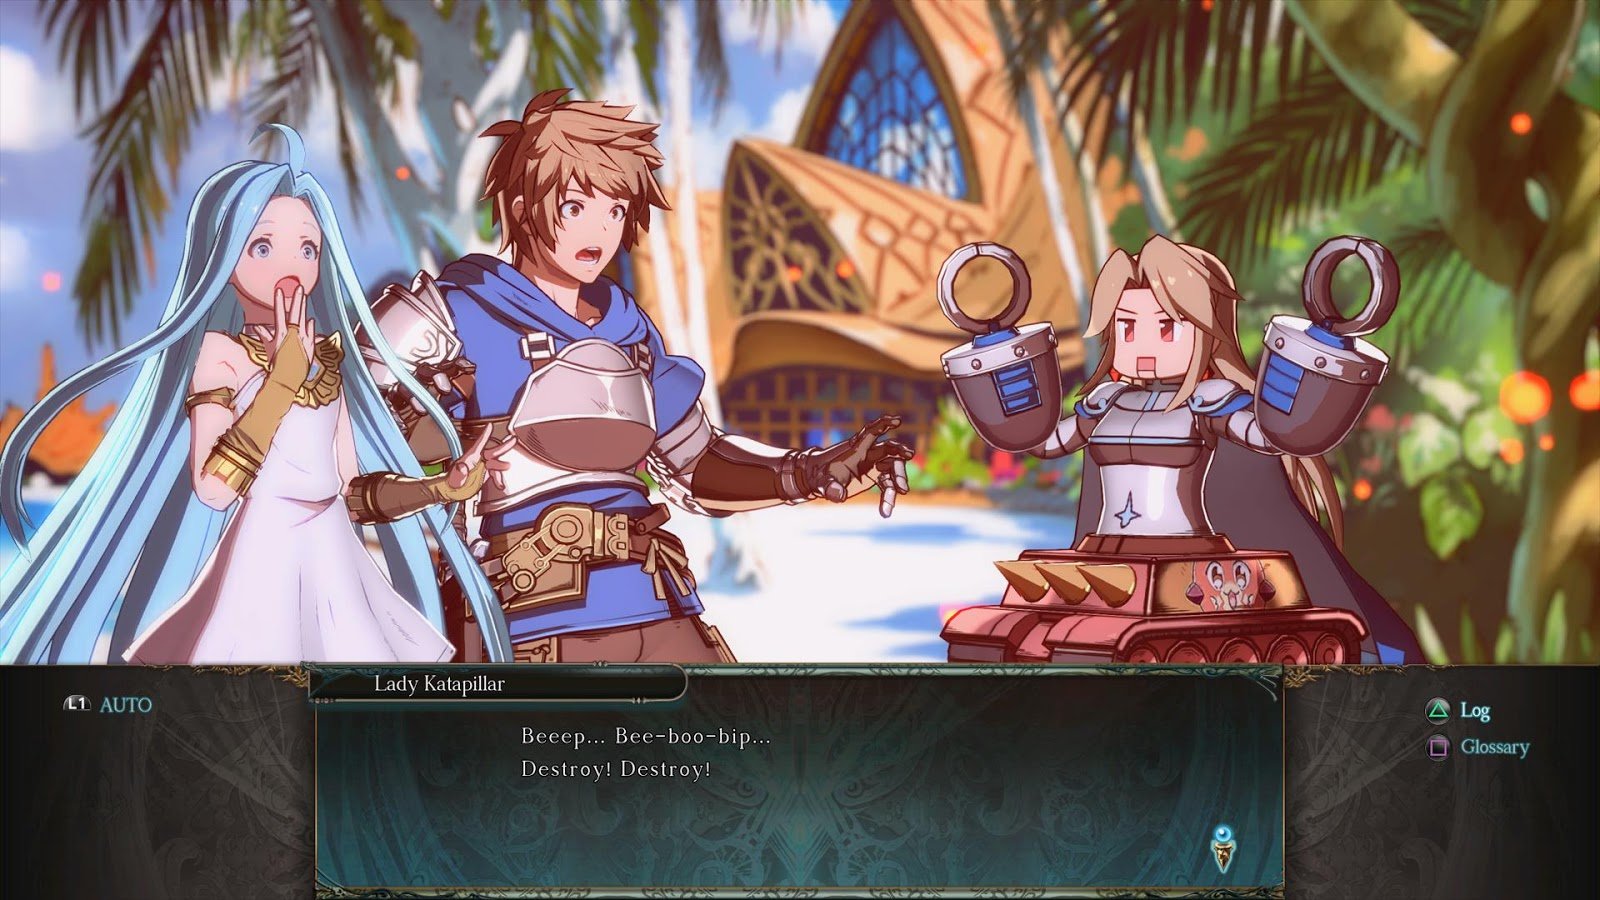 Granblue Fantasy: Versus review: a new step for fighting games with old  failings.